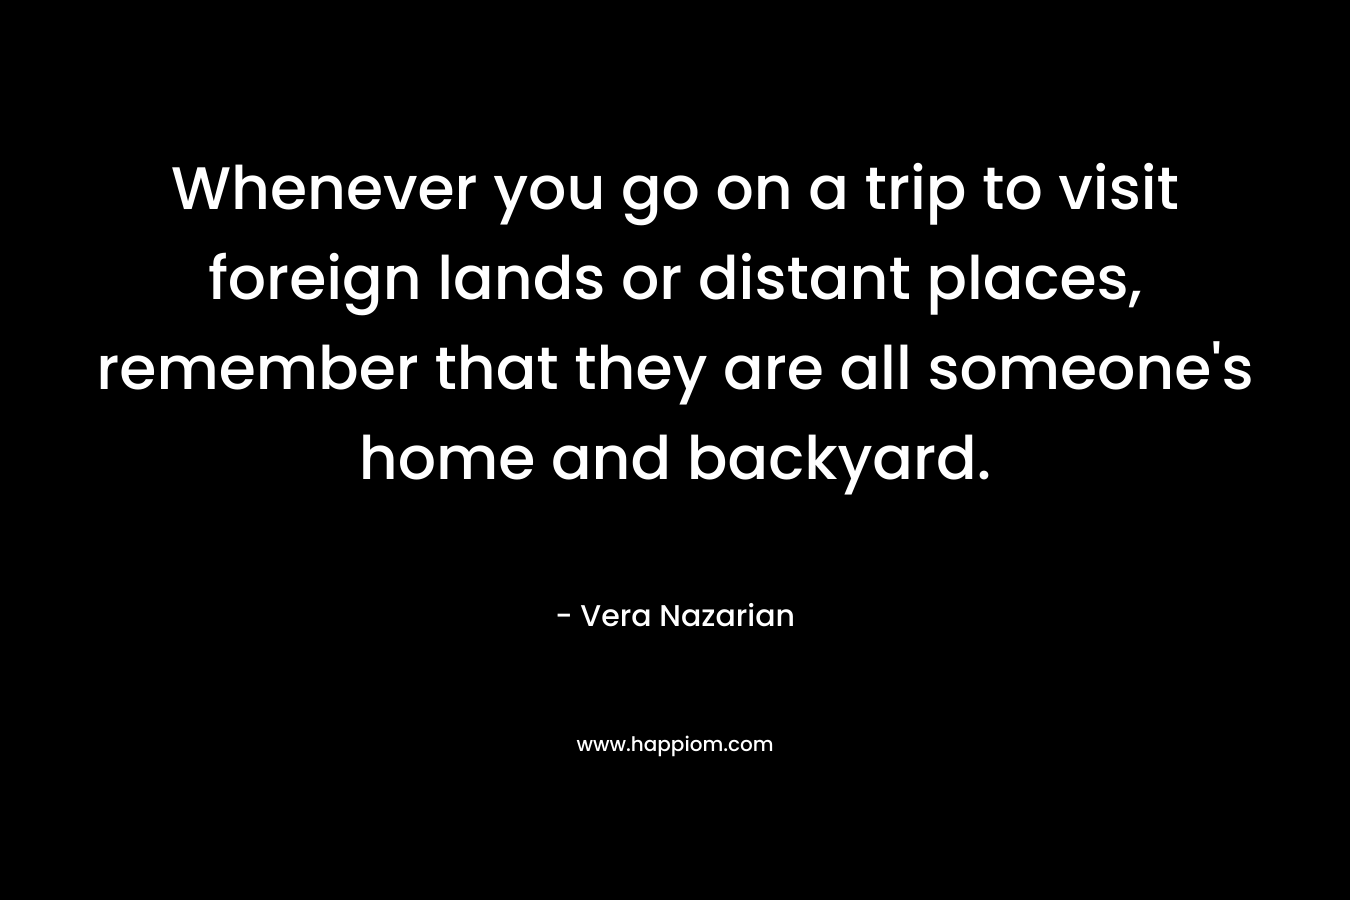 Whenever you go on a trip to visit foreign lands or distant places, remember that they are all someone’s home and backyard. – Vera Nazarian